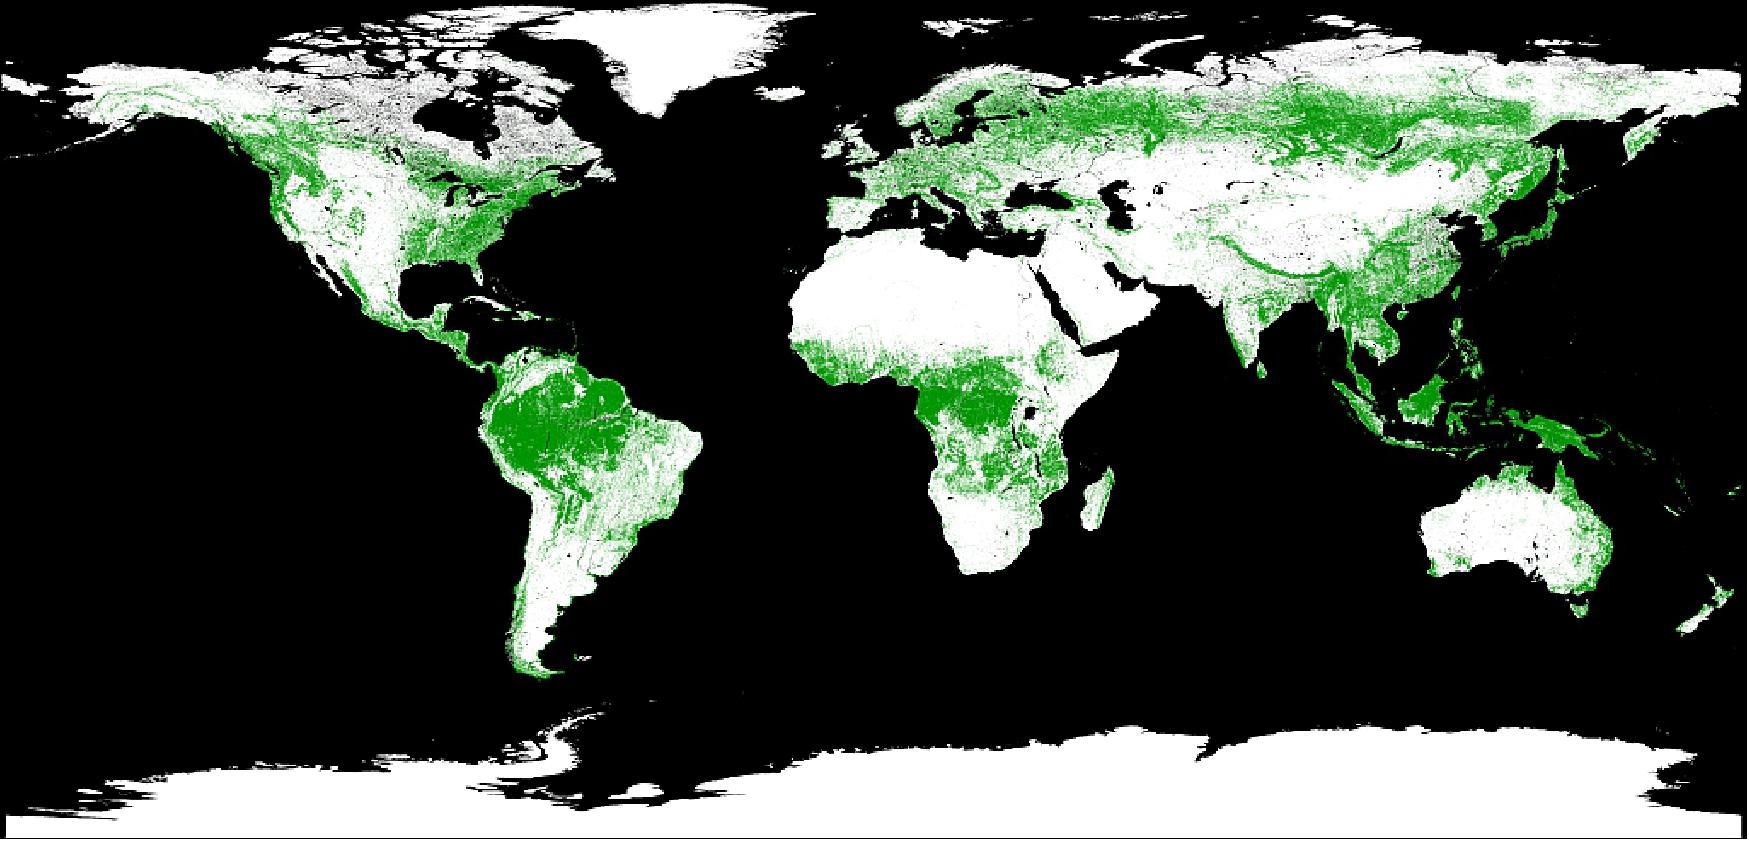 Figure 35: Global TanDEM-X Forest/Non-forest Map (image credit: DLR)